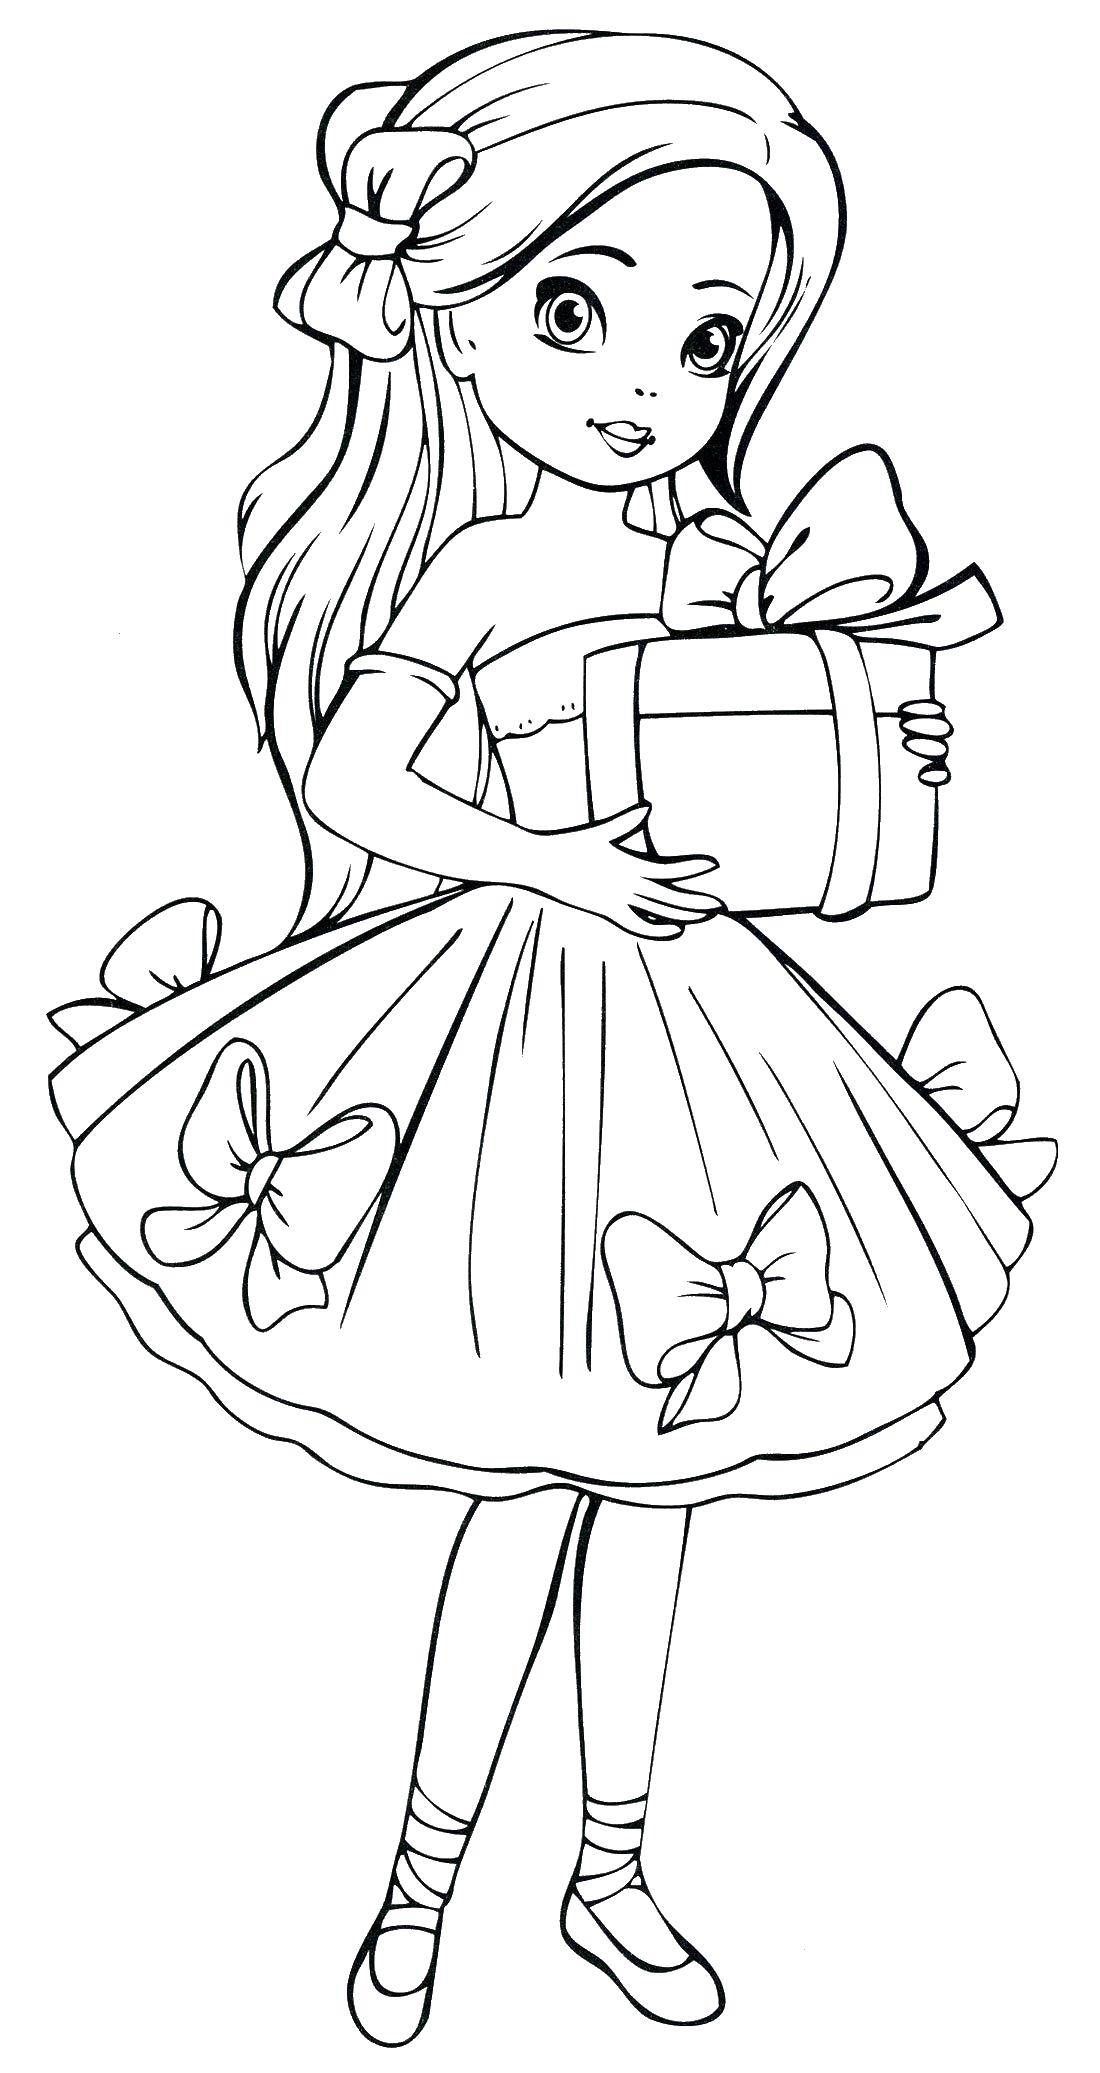 Coloring Girl and gift. Category For girls. Tags:  girl , dress, gift.